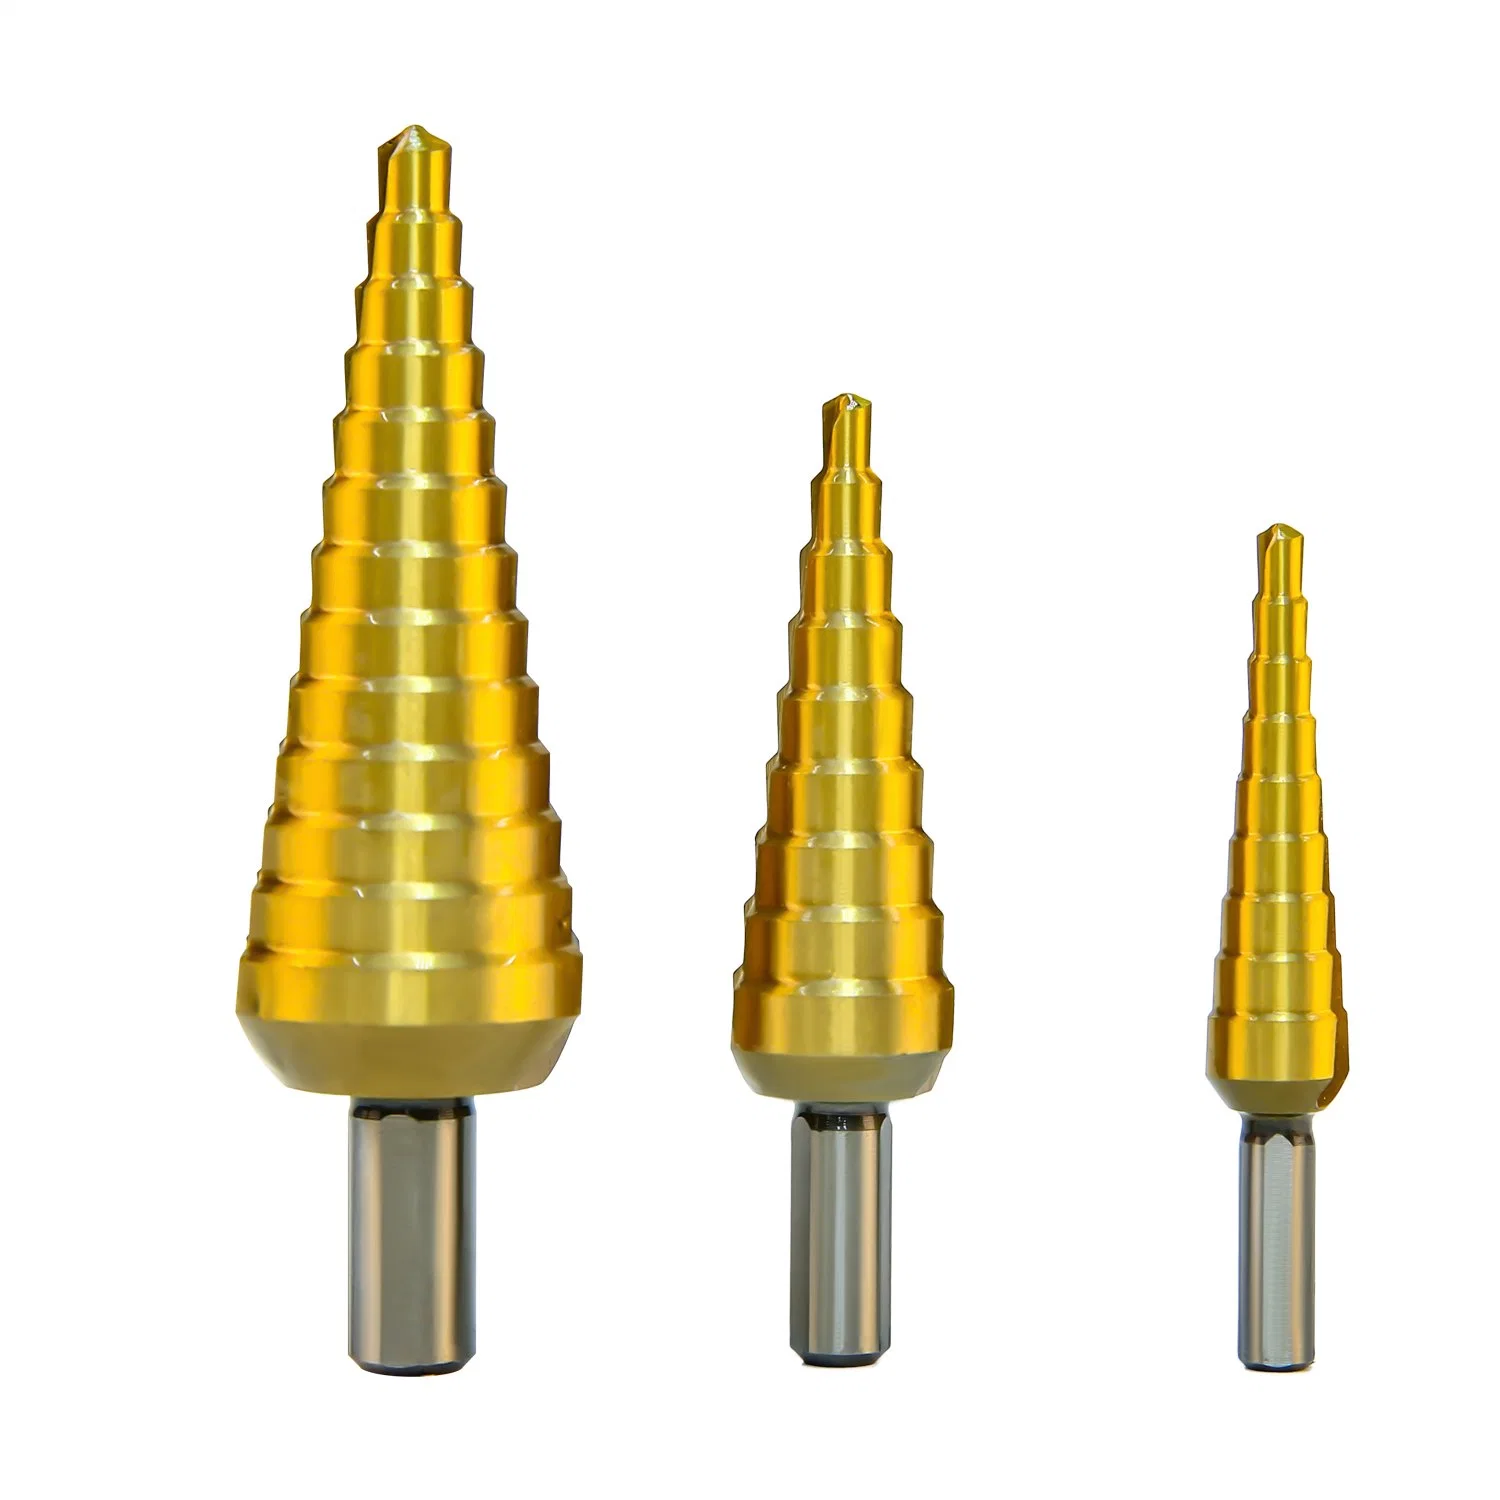 Goldmoon 3PCS High Speed Steel Straight Groove Titanium Plated Step Drill Bits for Sheet Metal Hole Drilling Cutting